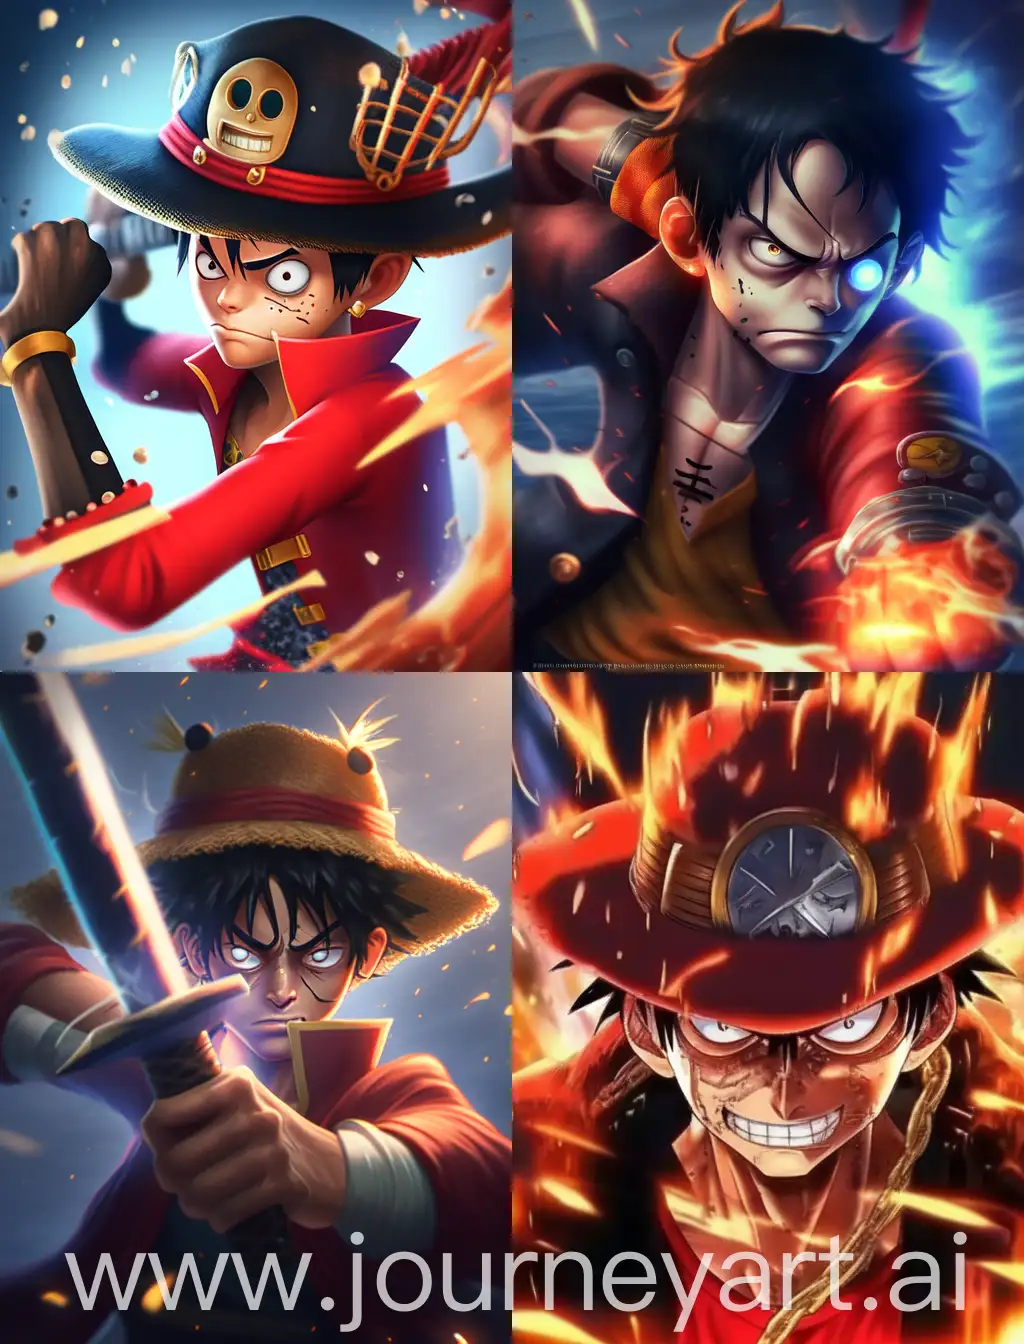 Monkey-D-Luffy-the-Richest-Pirate-Detailed-Anime-Art-in-8K-Resolution